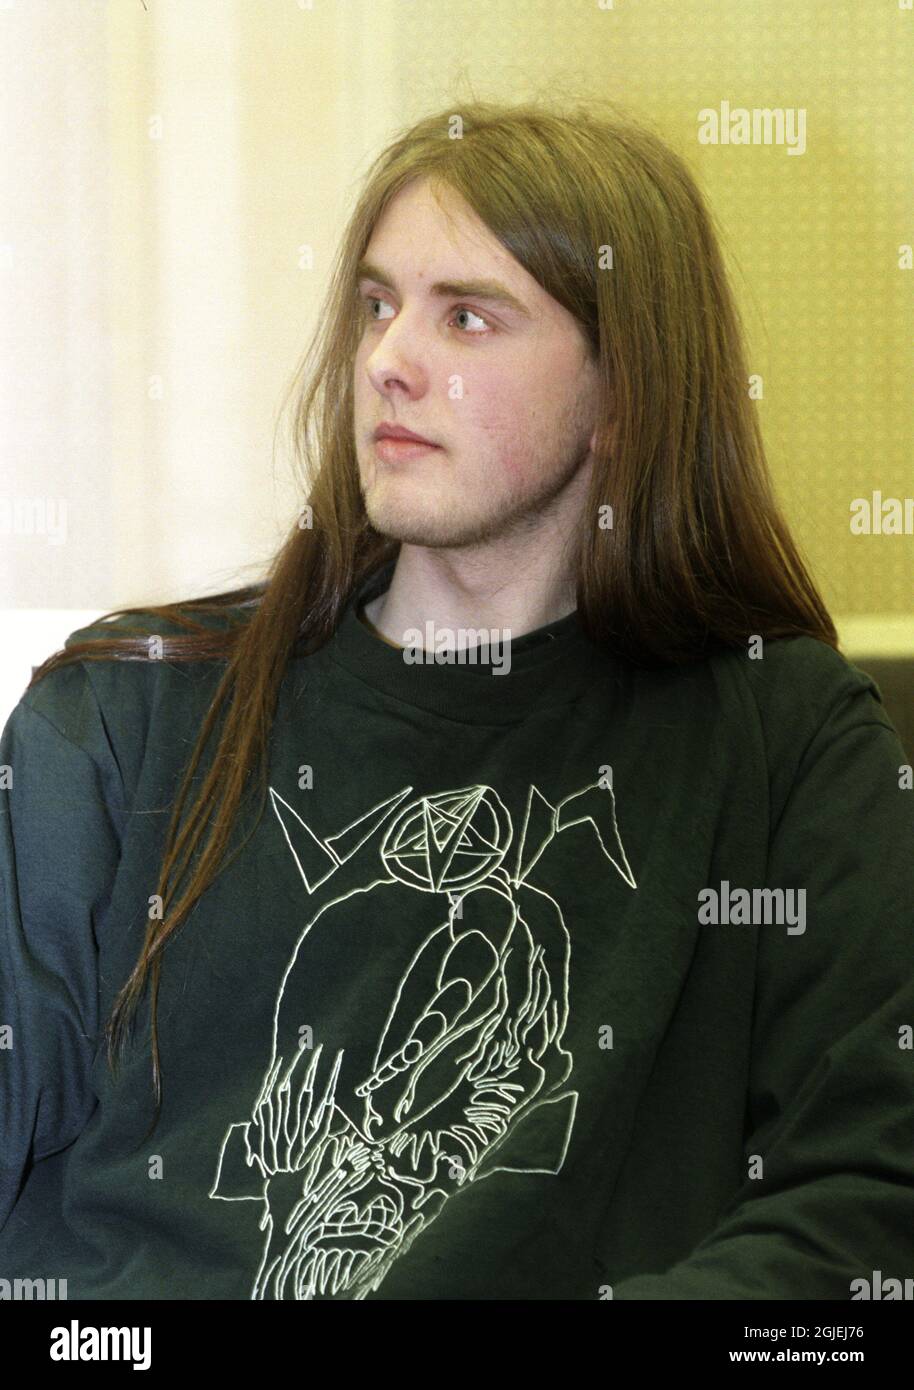 Varg Vikernes during his trial in Oslo, Norway. Varg Vikernes was born Kristian Vikernes on February 11, 1973, outside of Bergen, Norway. Known by the nom de plume Count Grishnackh during the early days of black metal in Norway. He is currently incarcerated for the 1993 murder of his former friend and member of the black metal-band Mayhem Oystein Aarseth (AKA Euronymous), serving a sentence of 21 years, the maximum possible in Norway and convicted of the arson of three churches in Norway. Stock Photo